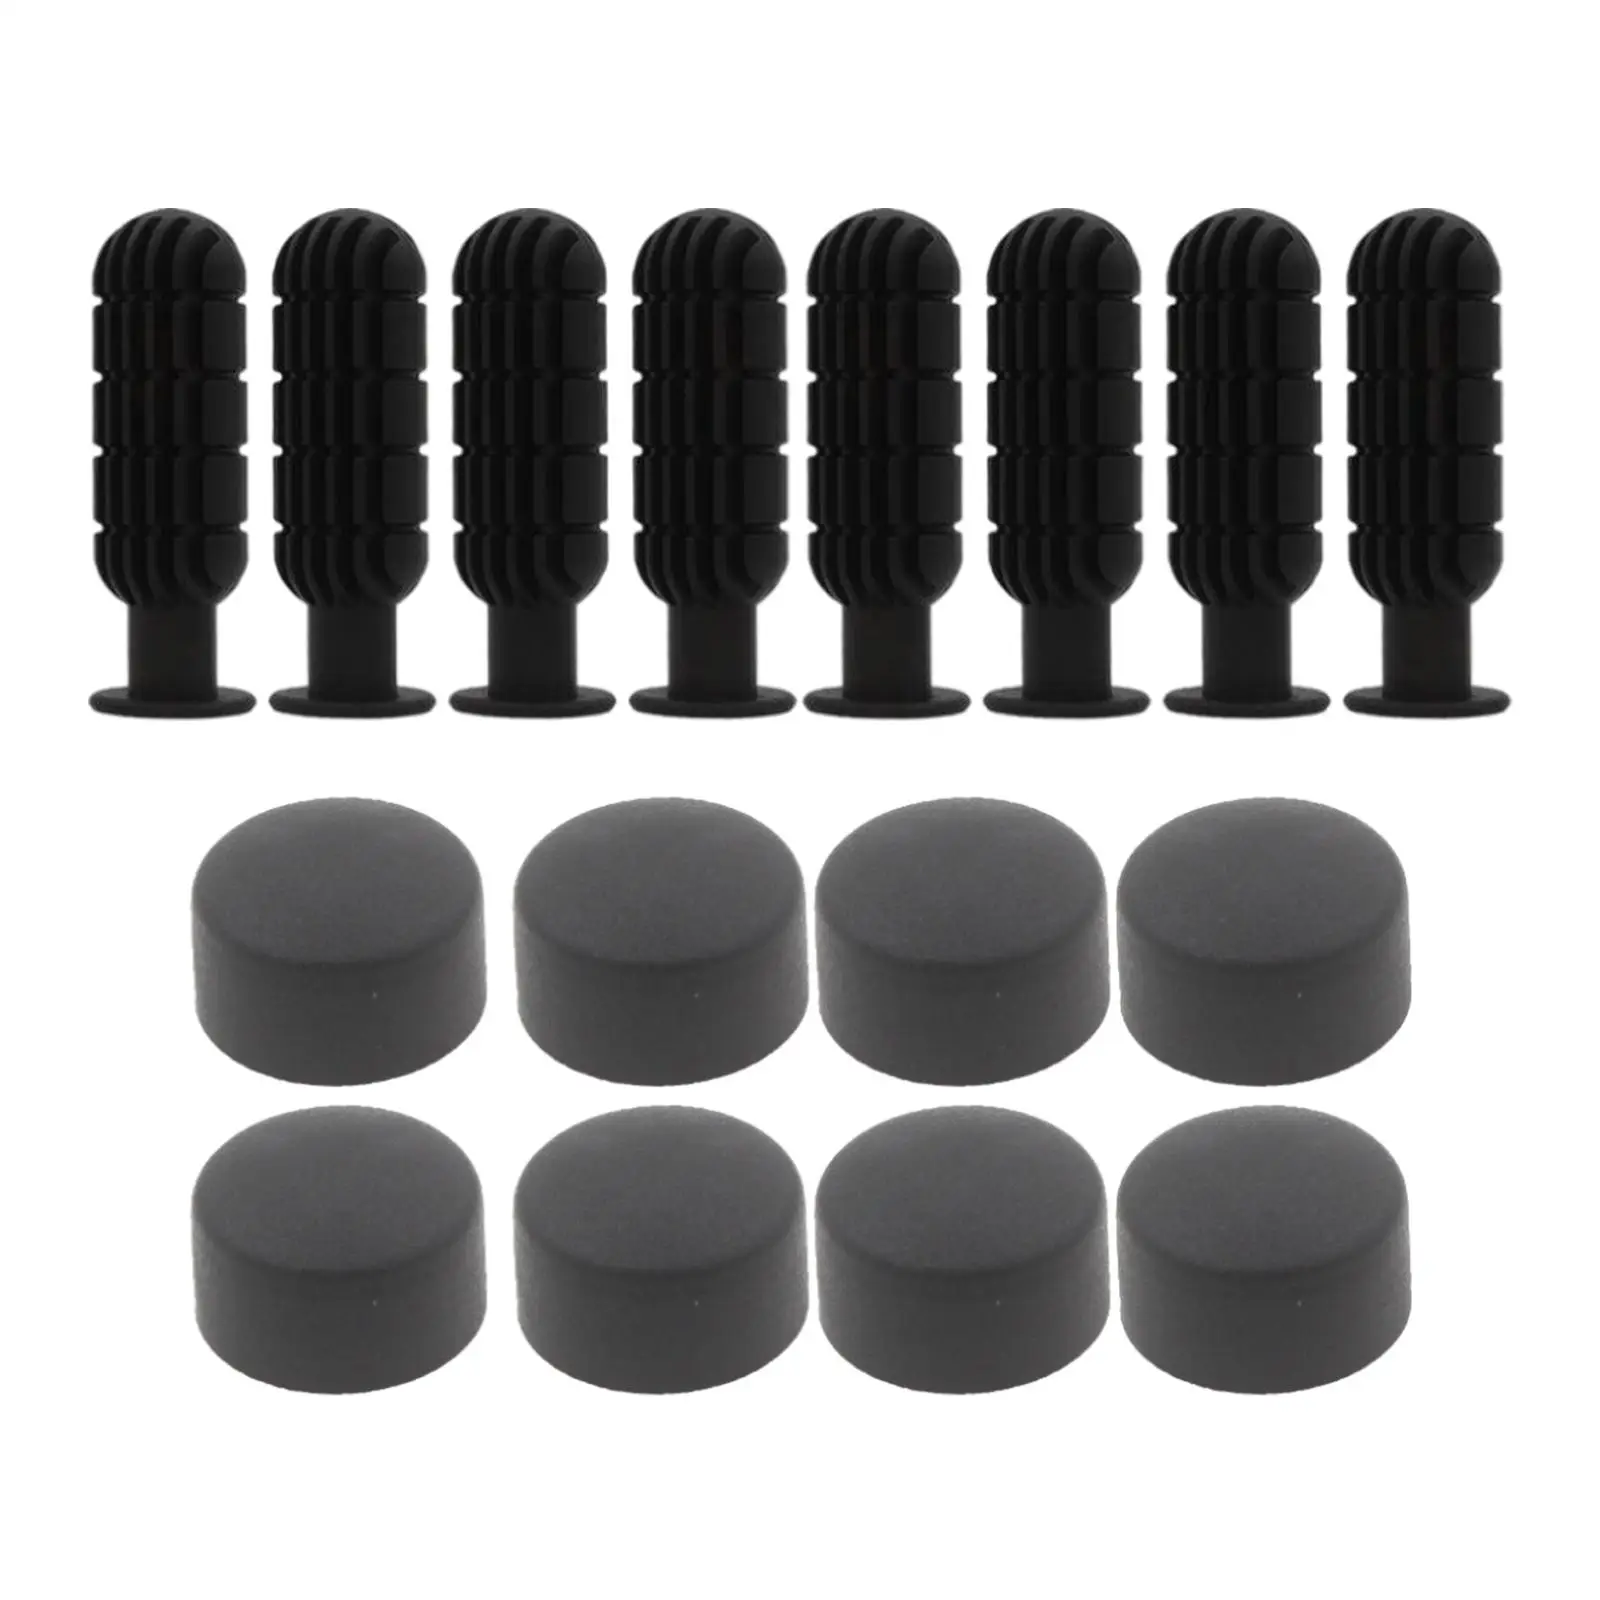 8 Pairs Foosball Handle Replace Table Football Game Black Non-Slip Design Handle Grips & End Plugs Accessories Components